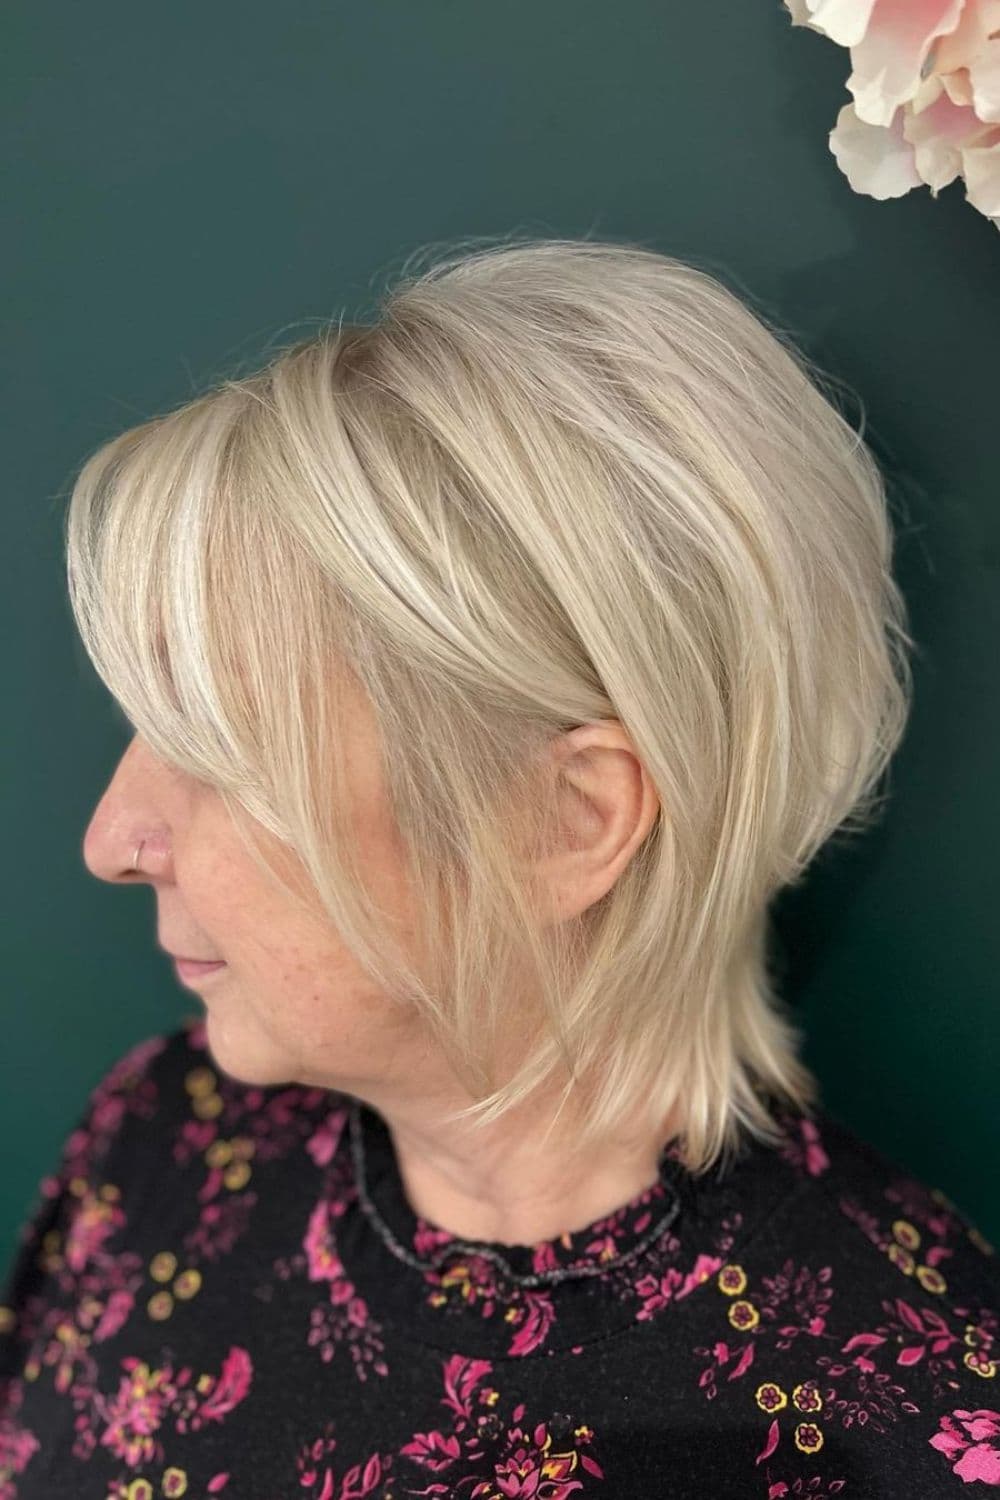 Side view of a woman with a short blonde wolf cut.